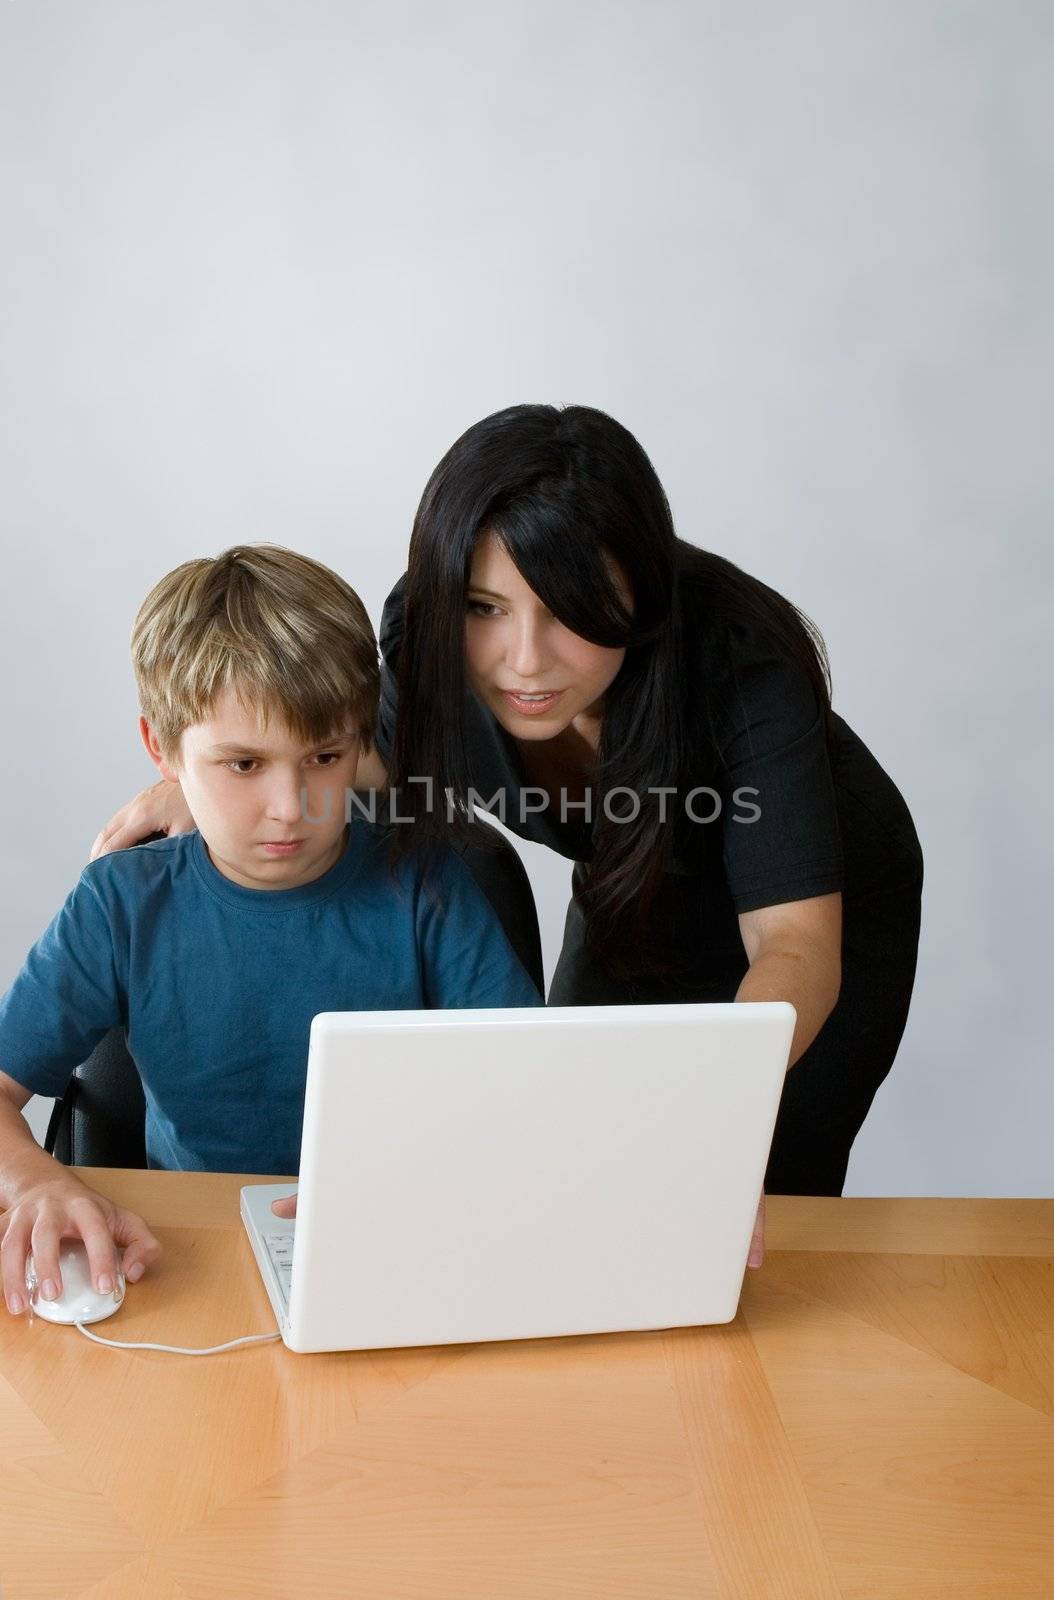 Adult assisting child on computer by lovleah